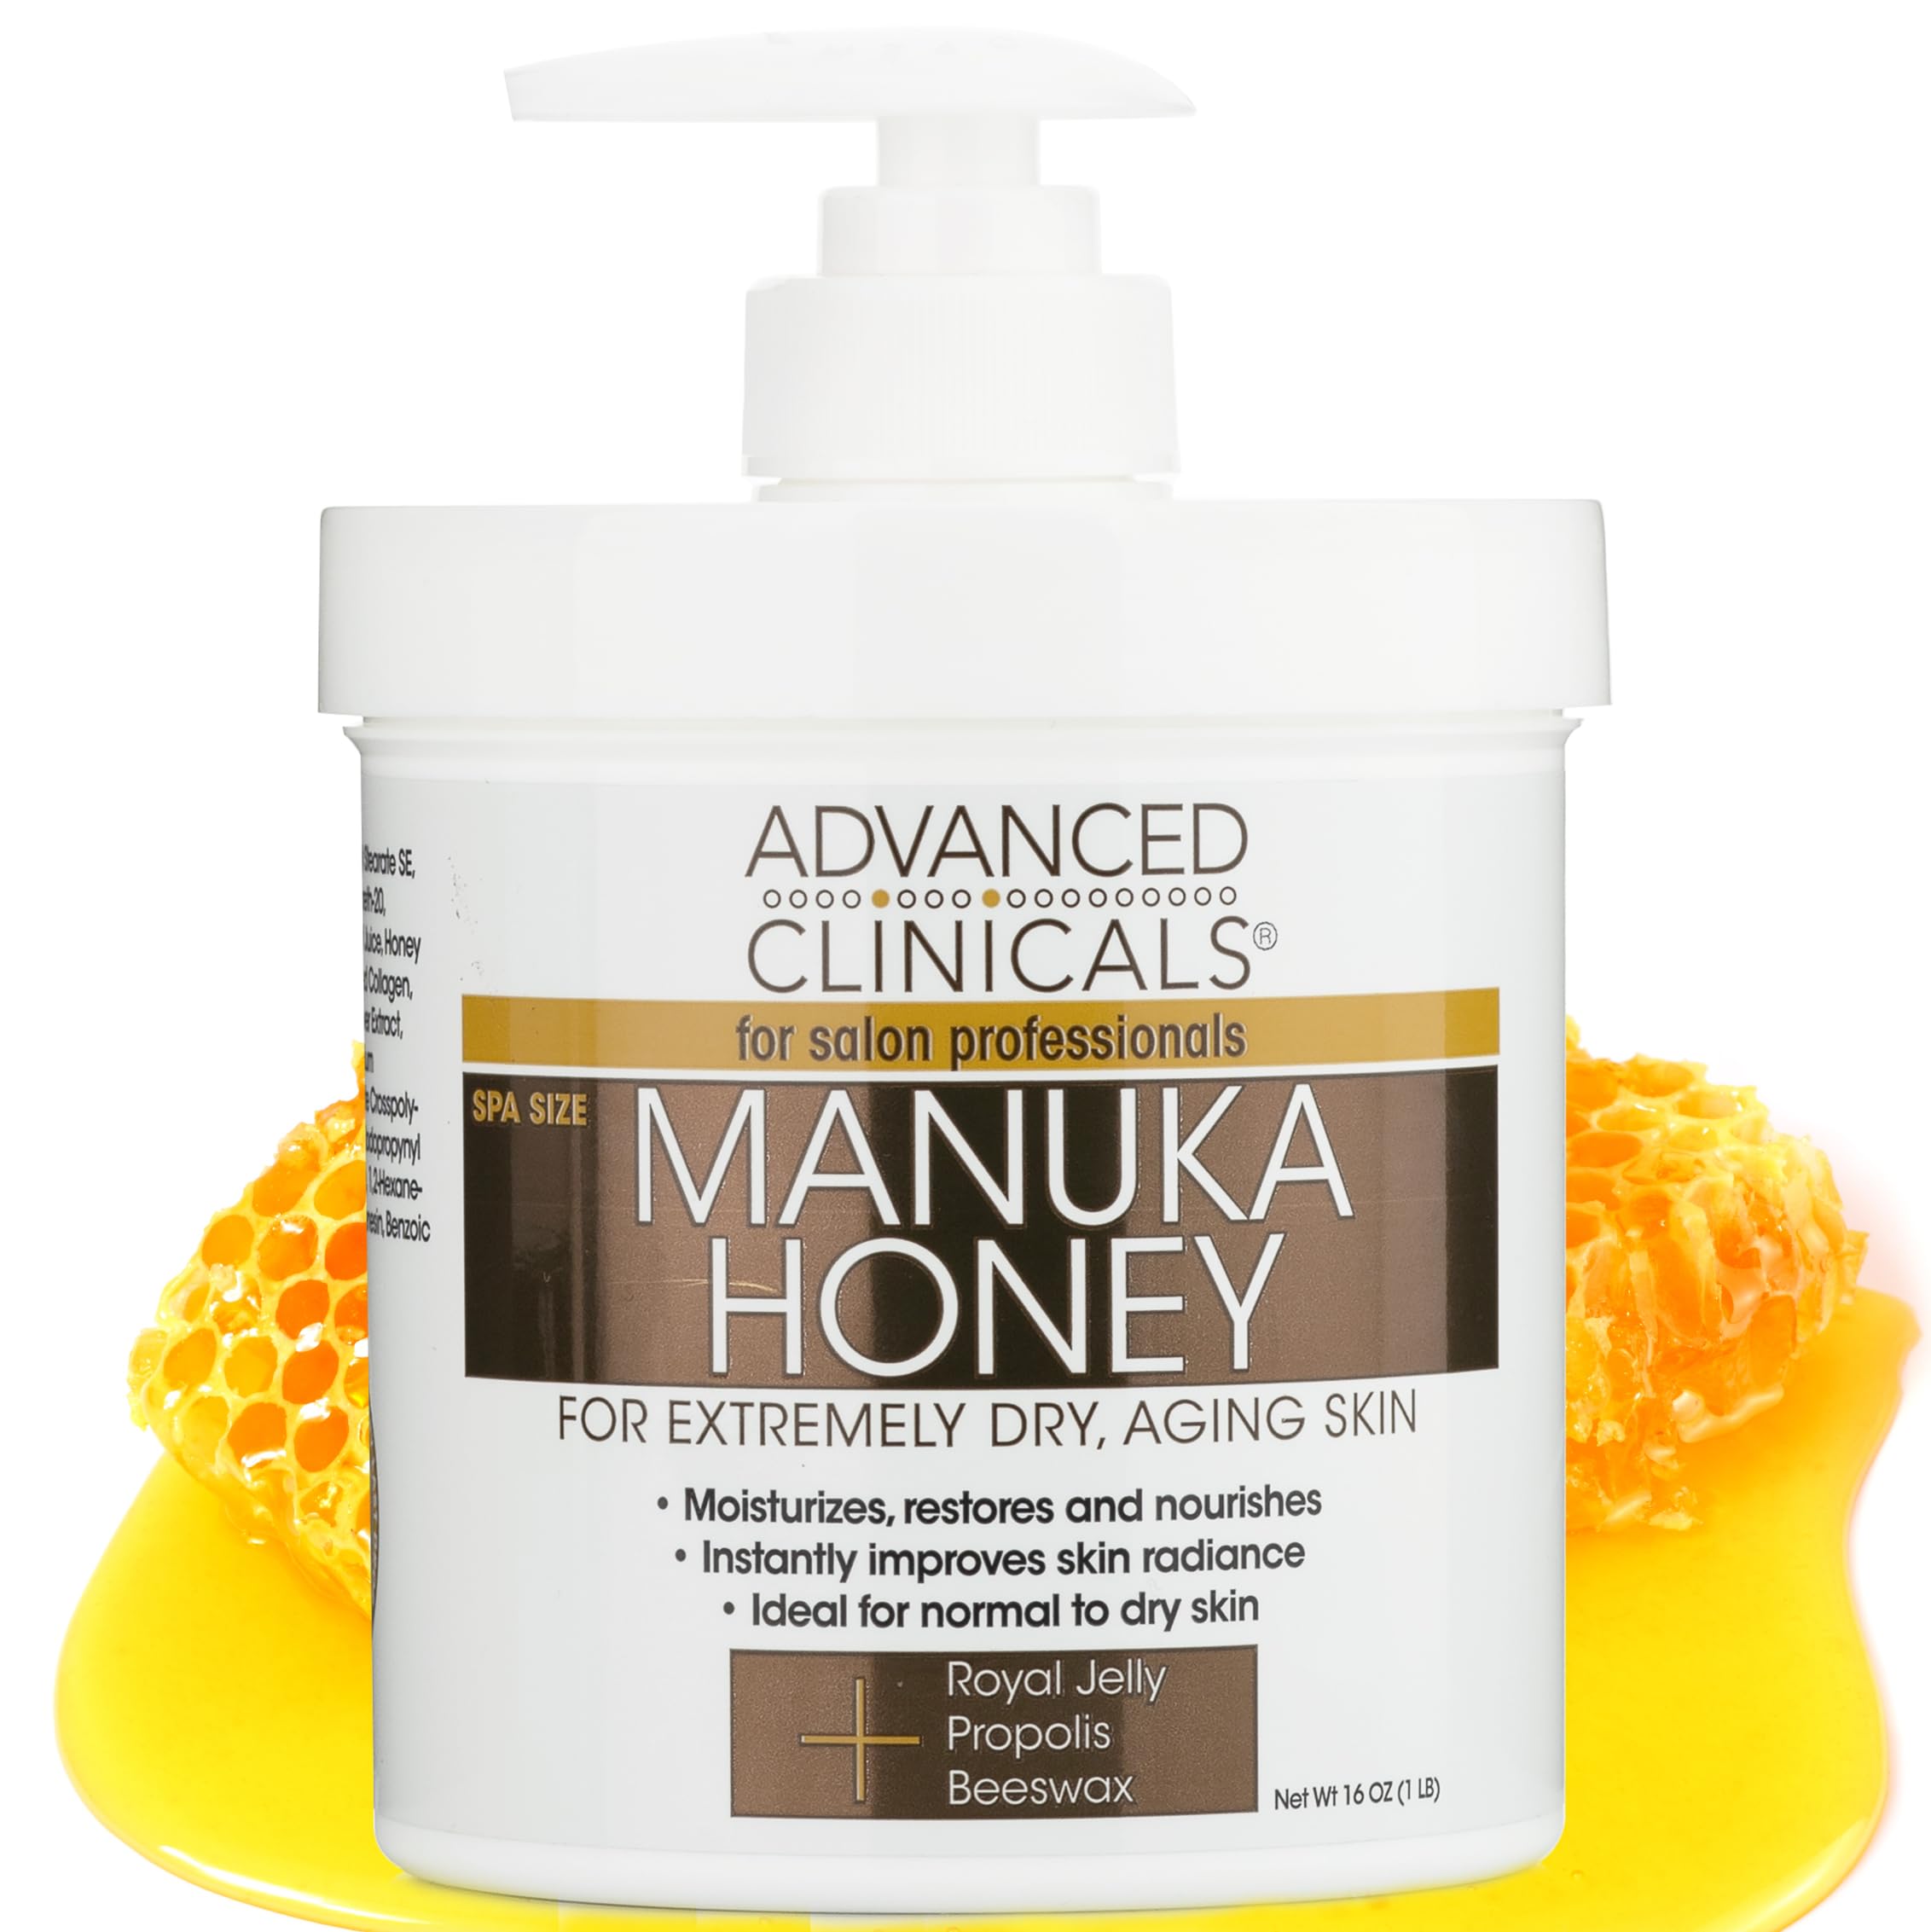 Advanced Clinicals Manuka Honey Cream Face Moisturizer & Body Butter Lotion For Dry Skin | Firming & Hydrating Miracle Balm Skin Care Moisturizing Lotion For Women, Wrinkles, & Sun Damaged Skin, 16Oz